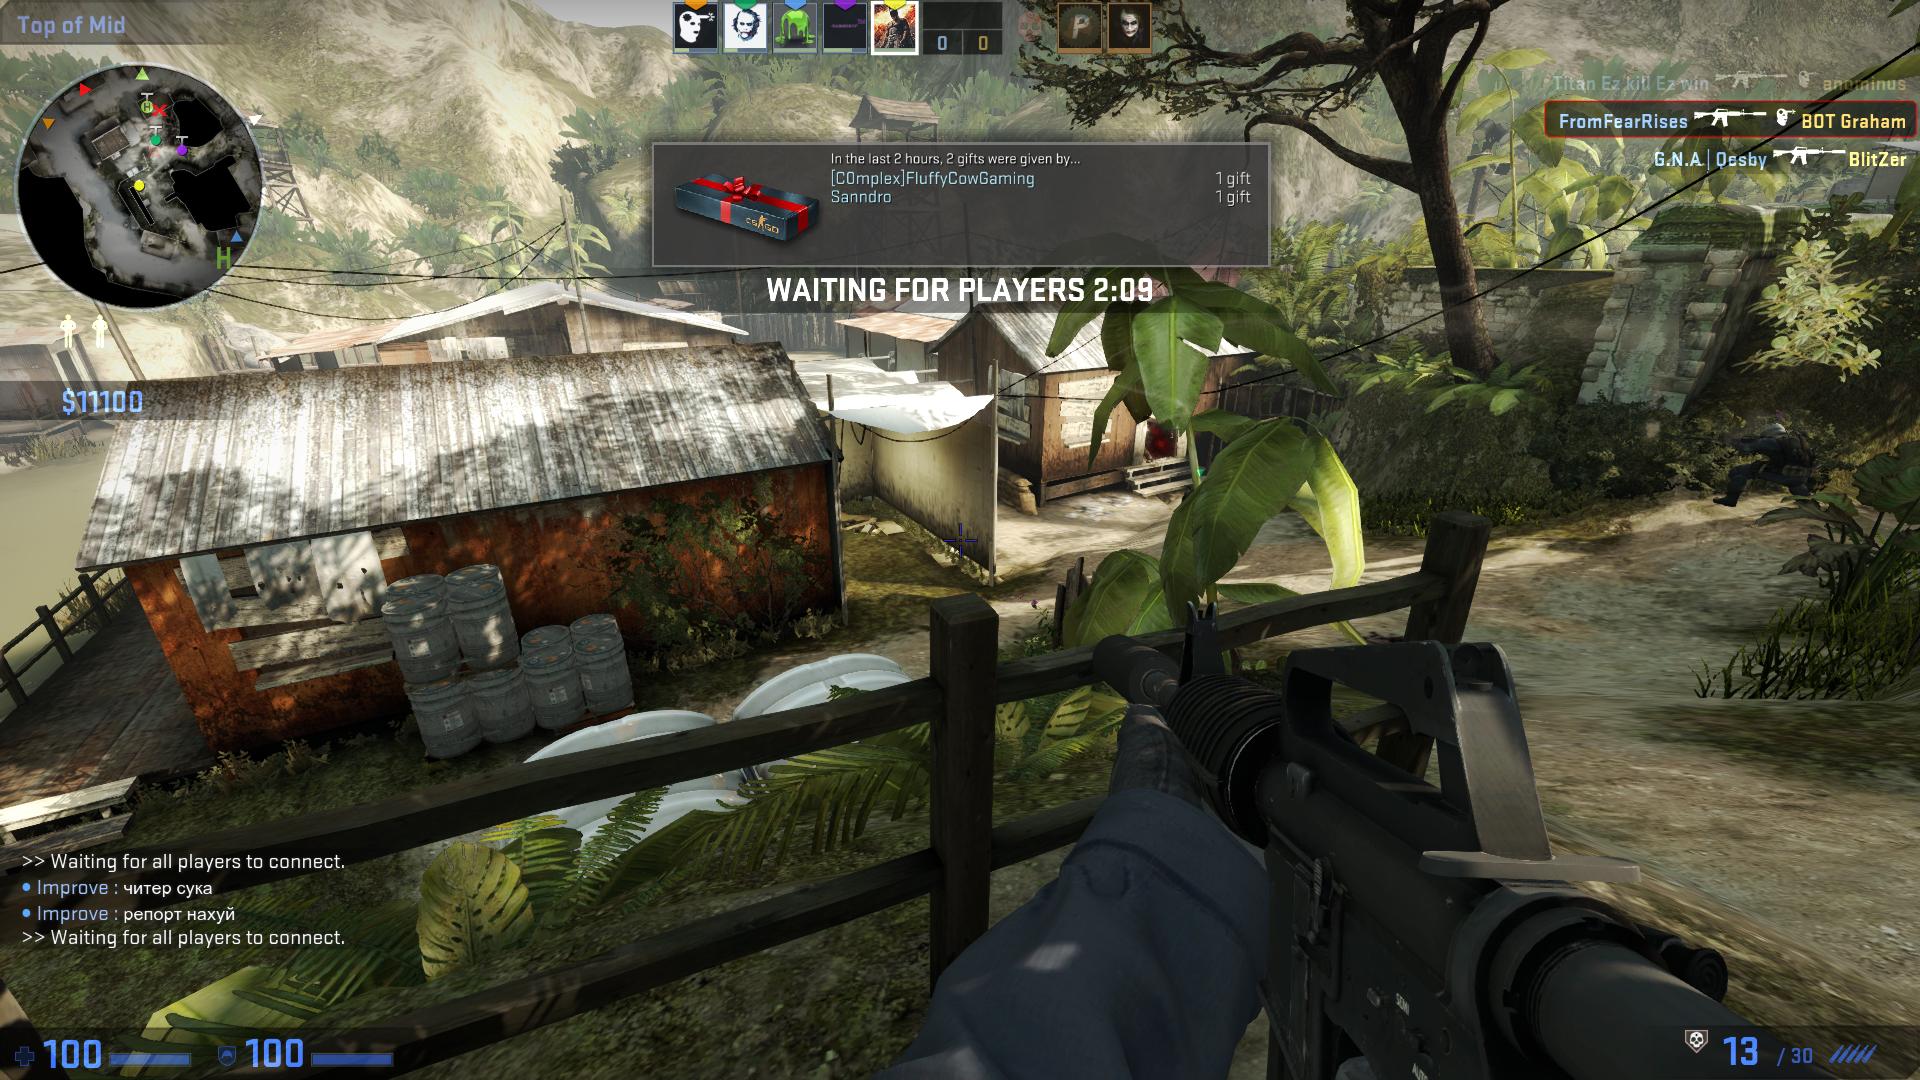 Counter-Strike: Global Offensive Review (PC version)